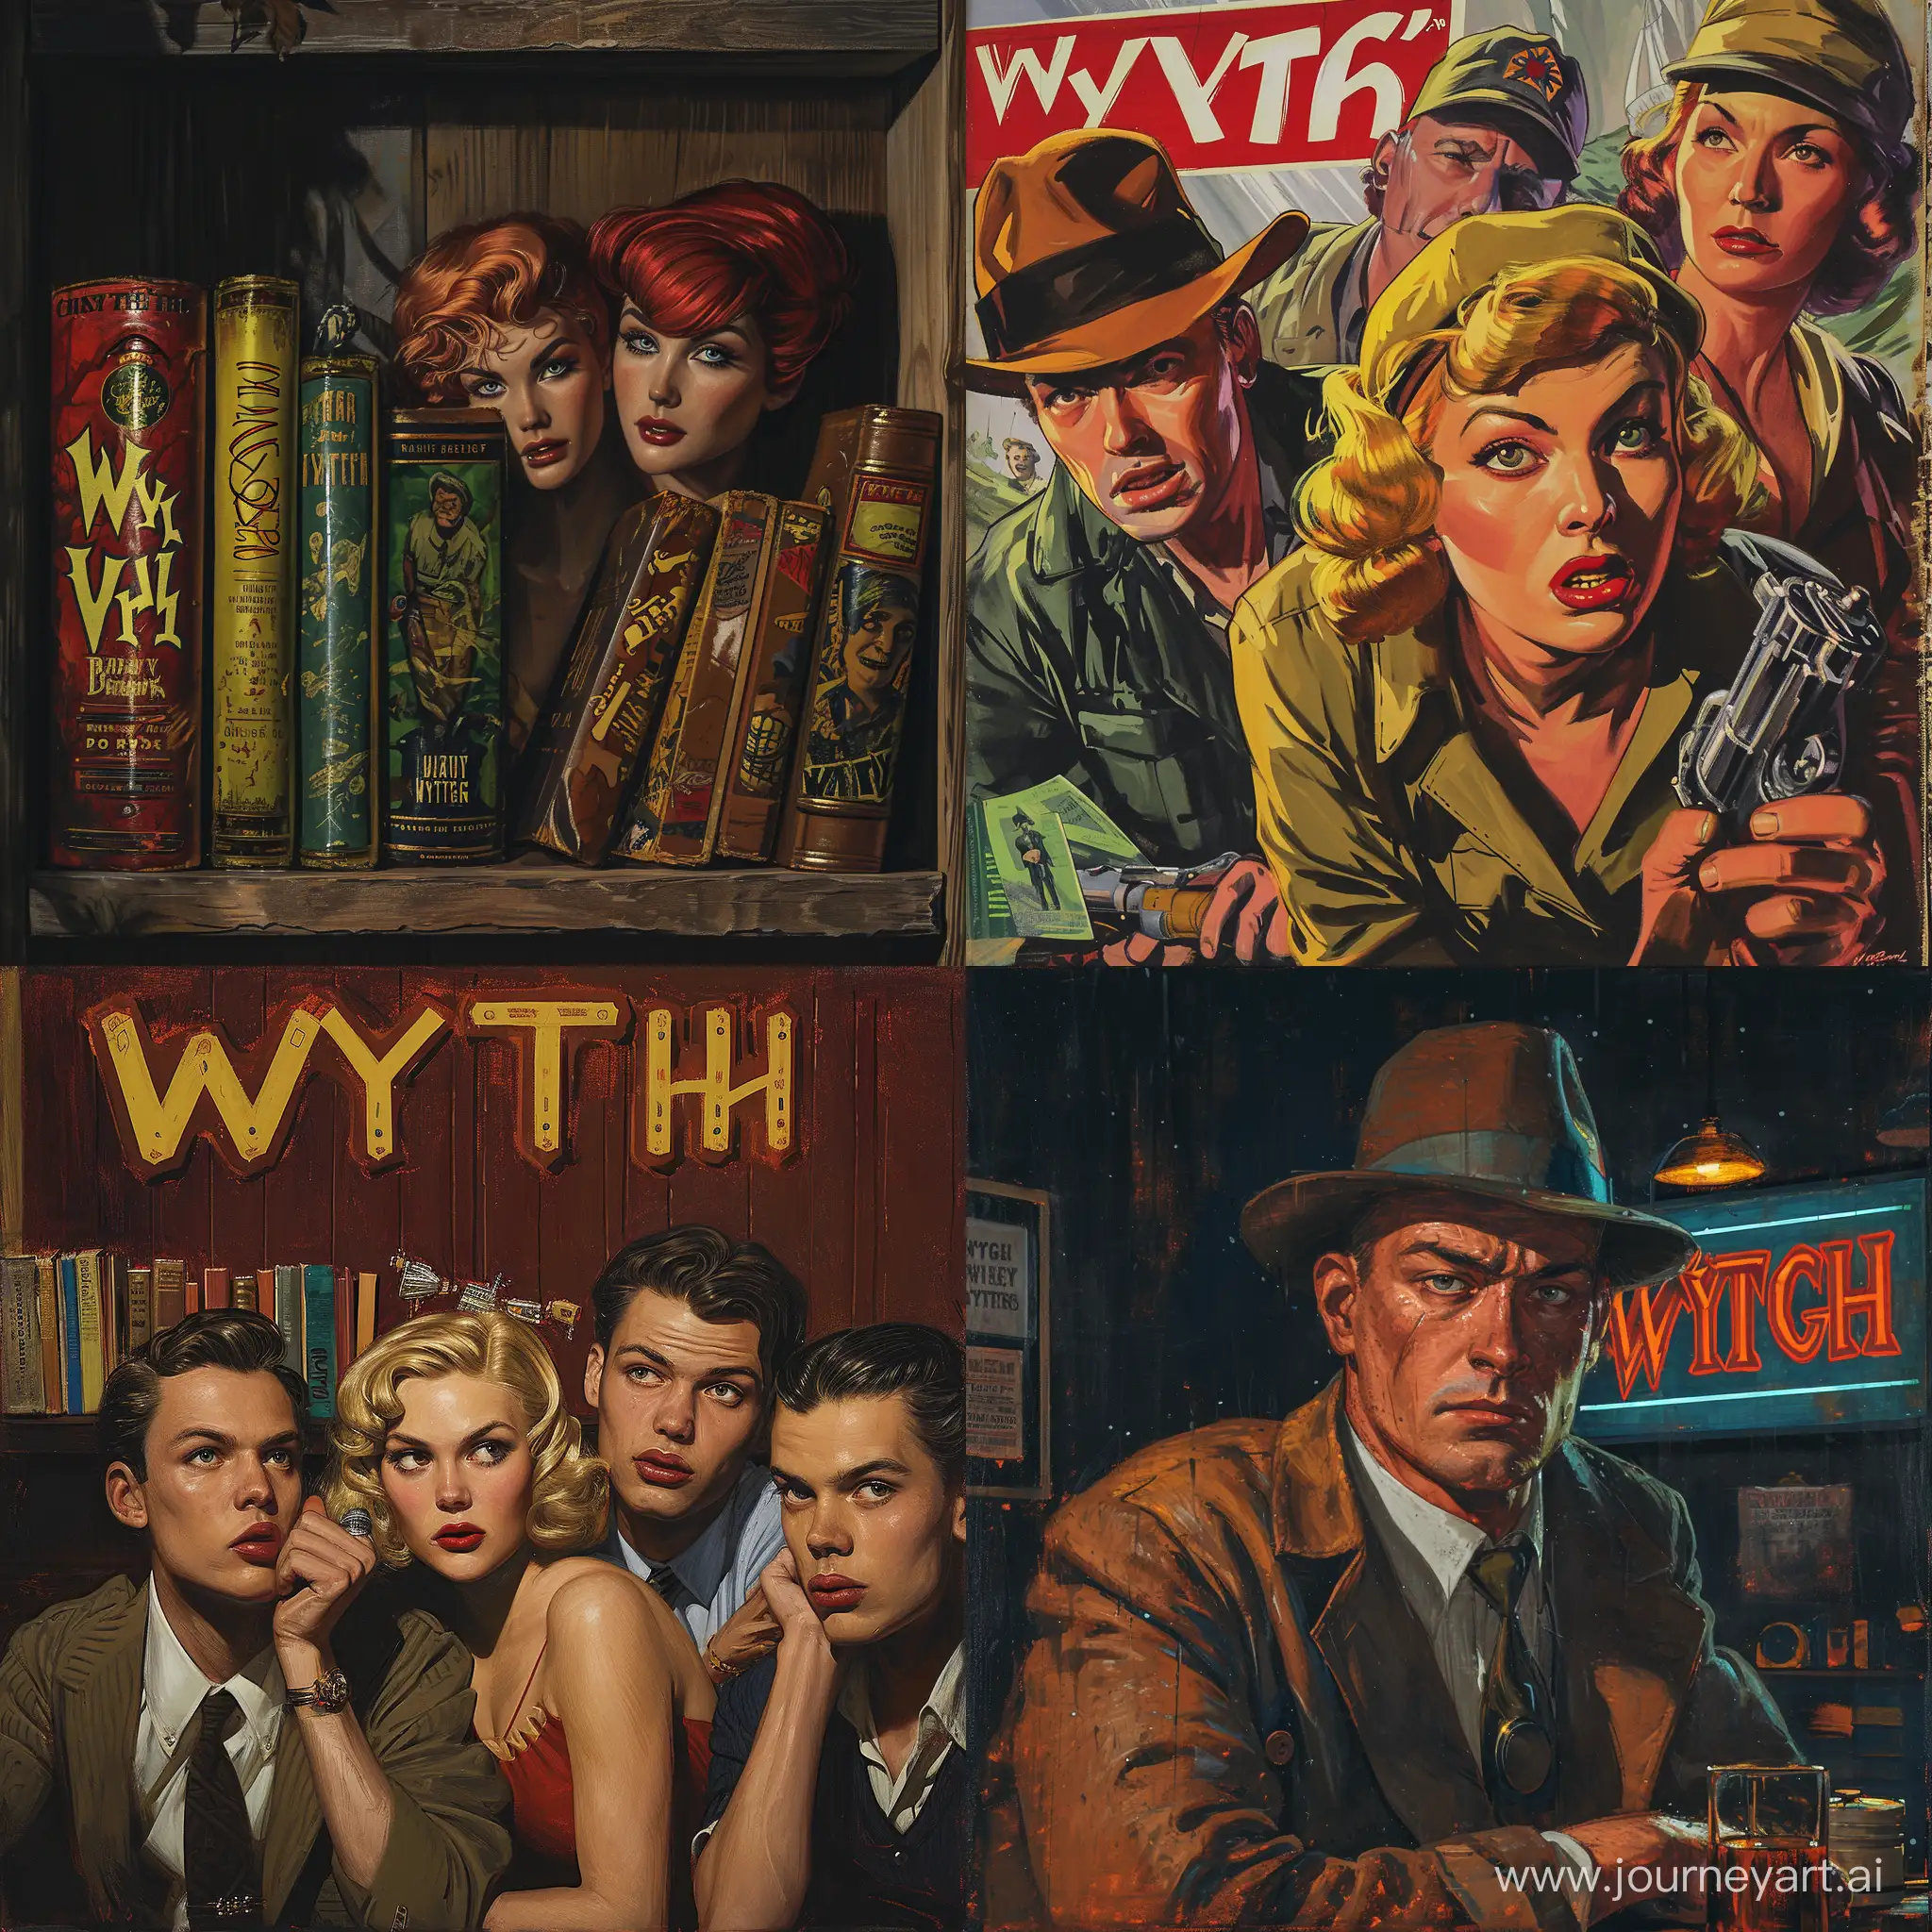 Wytch-Collection-of-Realistic-30s-Comic-Book-Style-Album-Covers